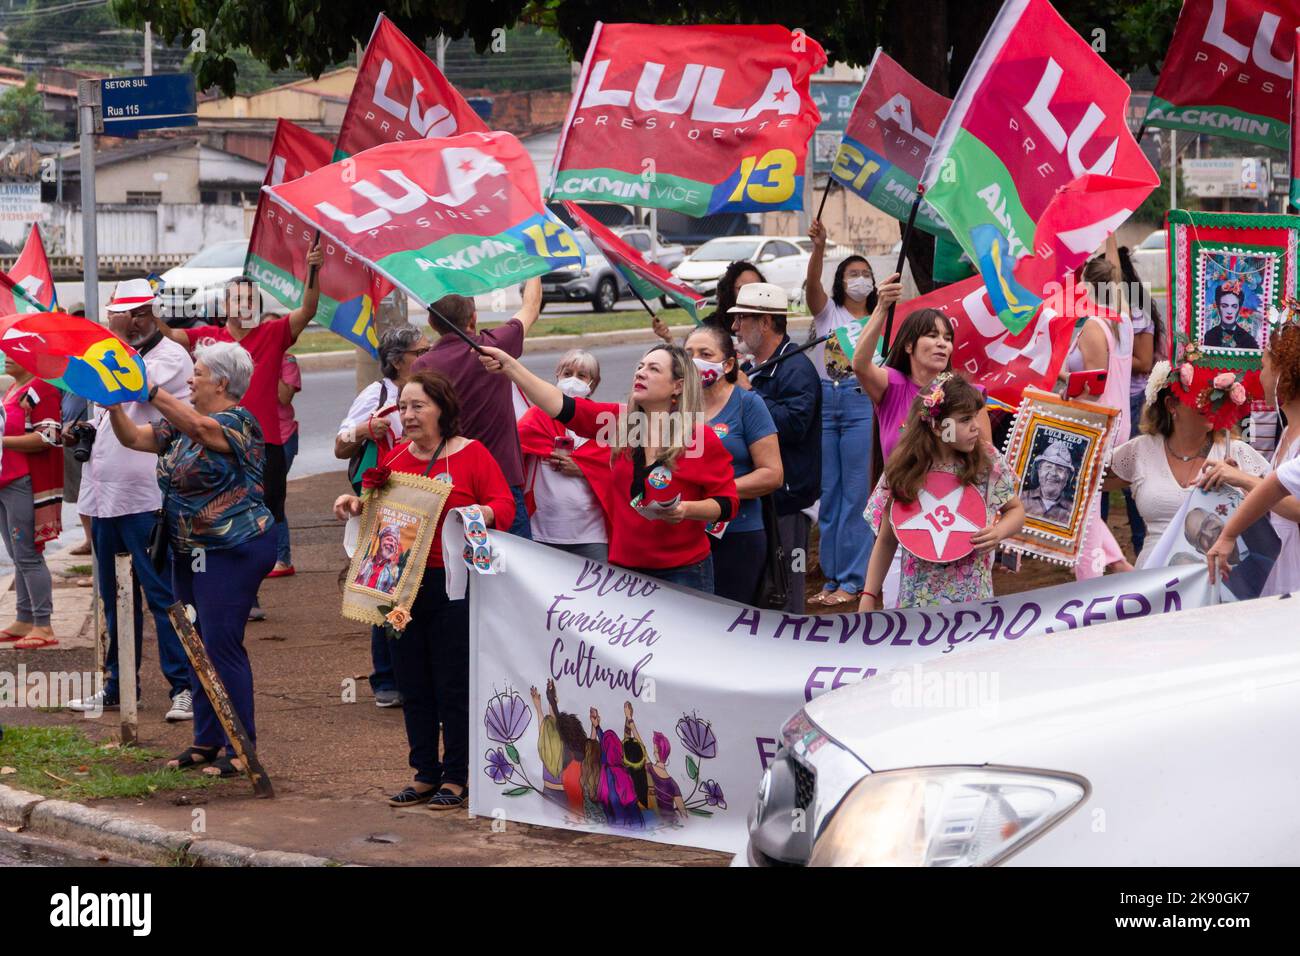 Goiânia, Goias, Brazil – October 21, 2022: Several people in action on the street with Lula's red flags. Image made in an act to ask for votes for Lul Stock Photo